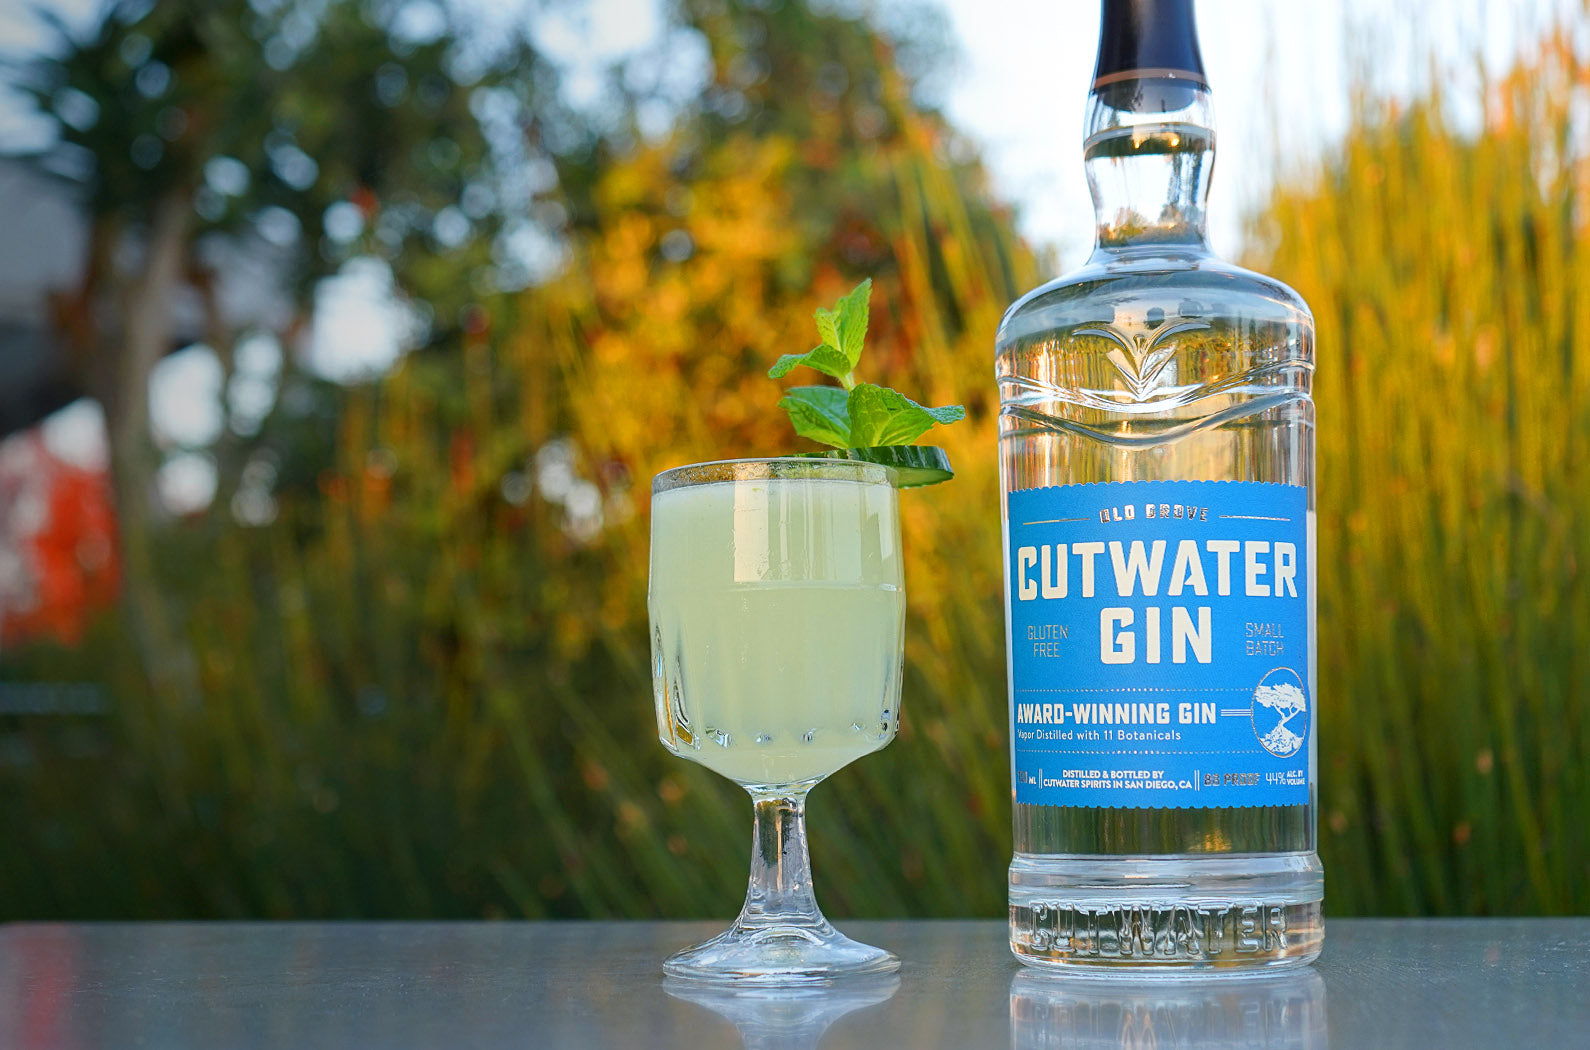 Cutwater Old Grove Small Batch Gin